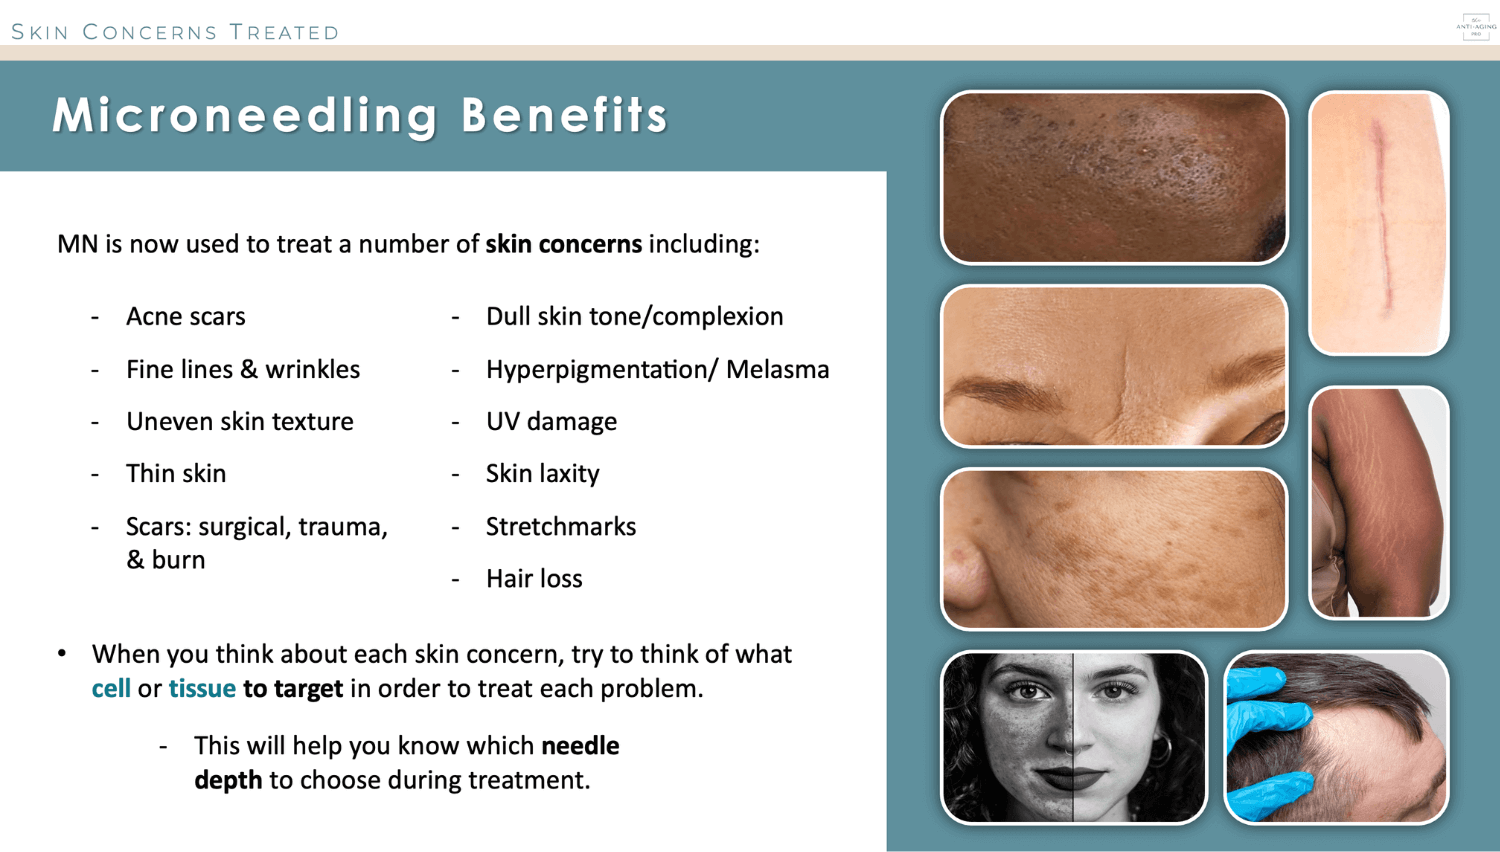 A list of microneedling benefits in the skin